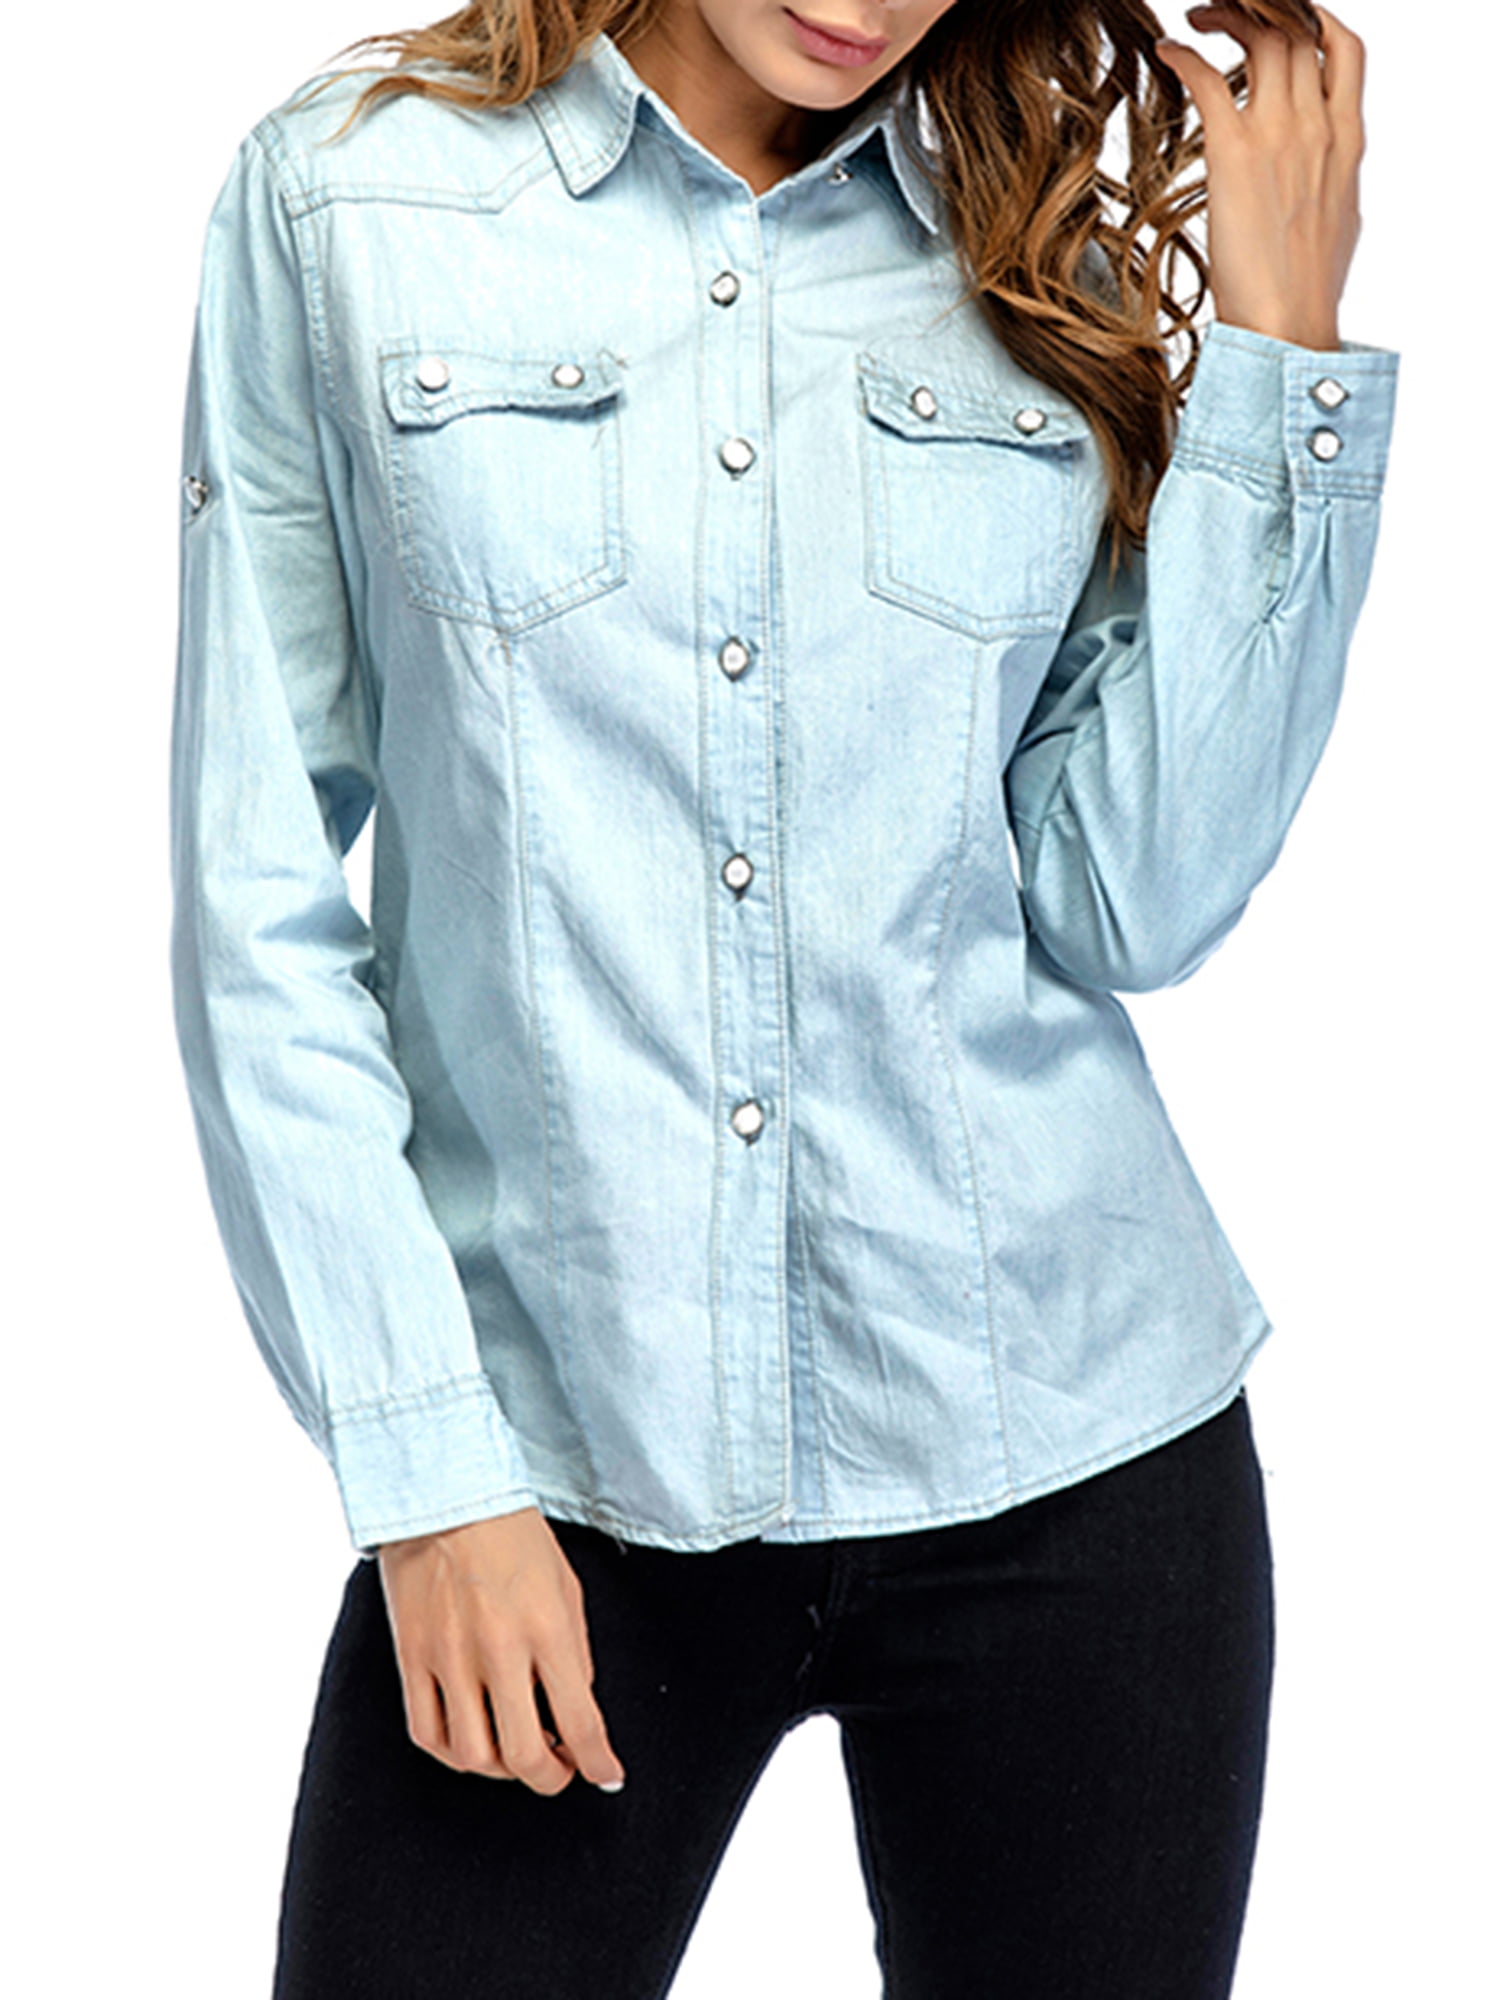 dressy blouses with jeans